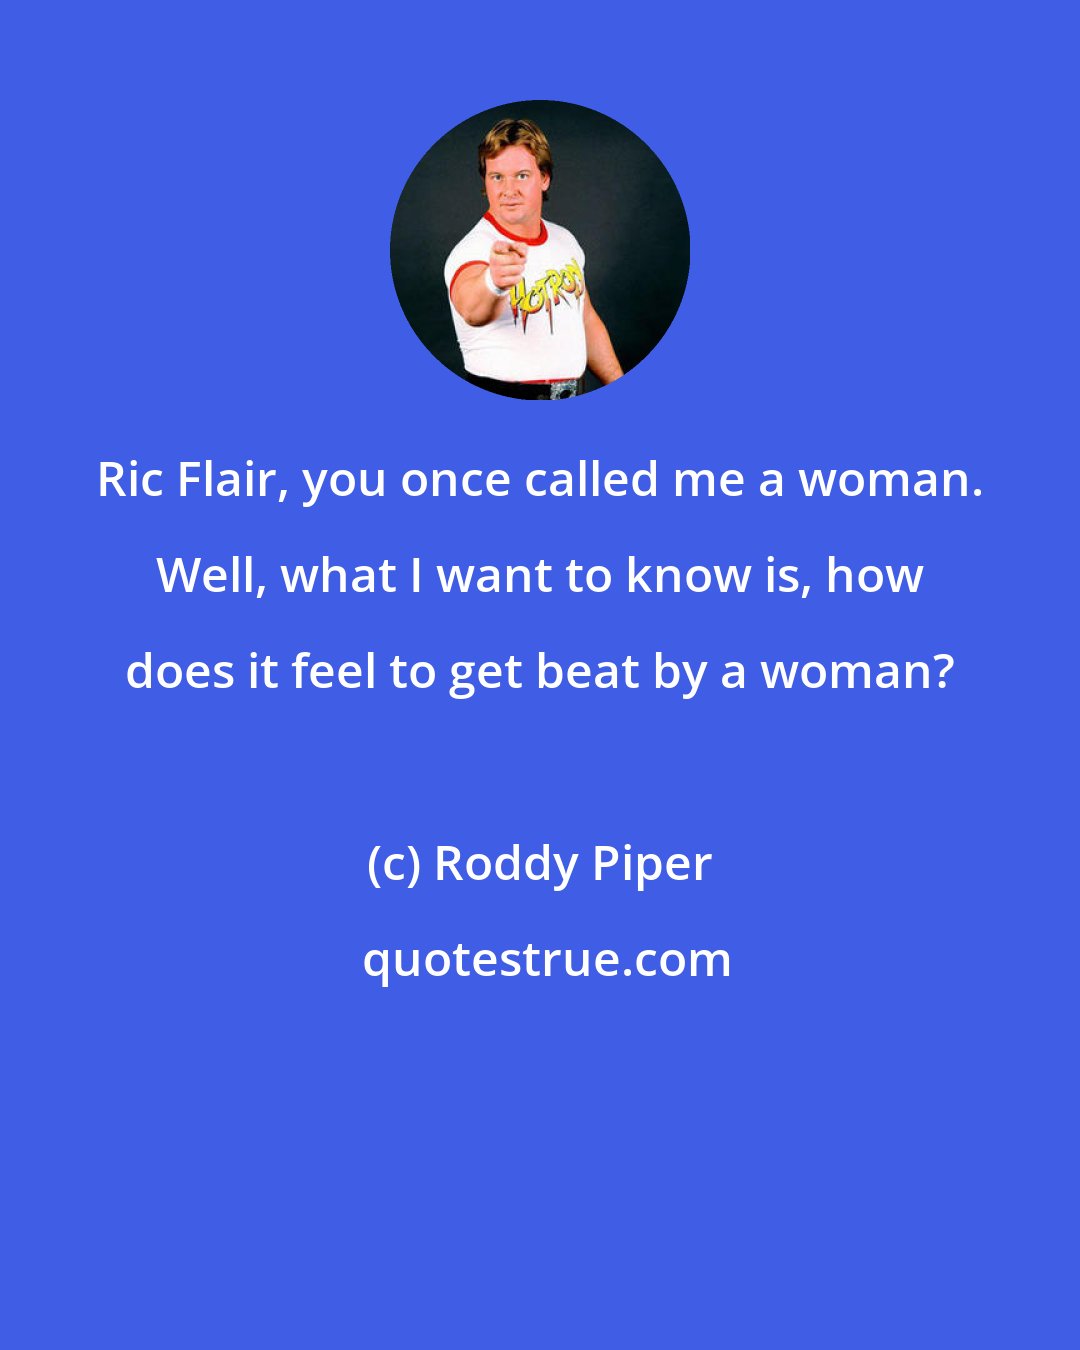 Roddy Piper: Ric Flair, you once called me a woman. Well, what I want to know is, how does it feel to get beat by a woman?